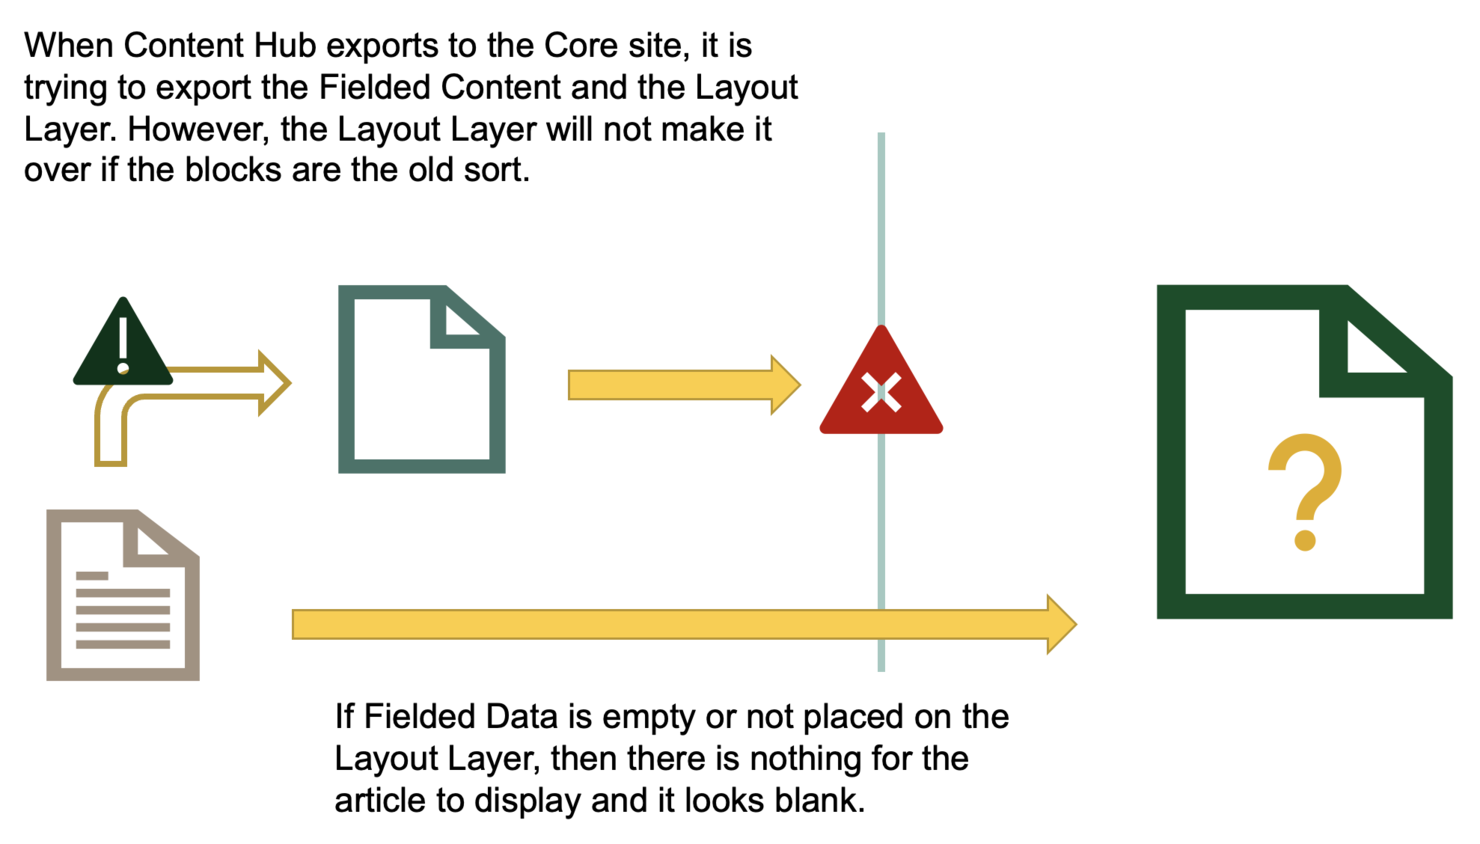 Diagram of how content exports from content hub, along with text: When Content Hub exports to the Core site, it is trying to export the Fielded Content and the Layout Layer. However, the Layout Layer will not make it over if the blocks are the old sort. If Fielded Data is empty or not placed on the  Layout Layer, then there is nothing for the article to display and it looks blank.